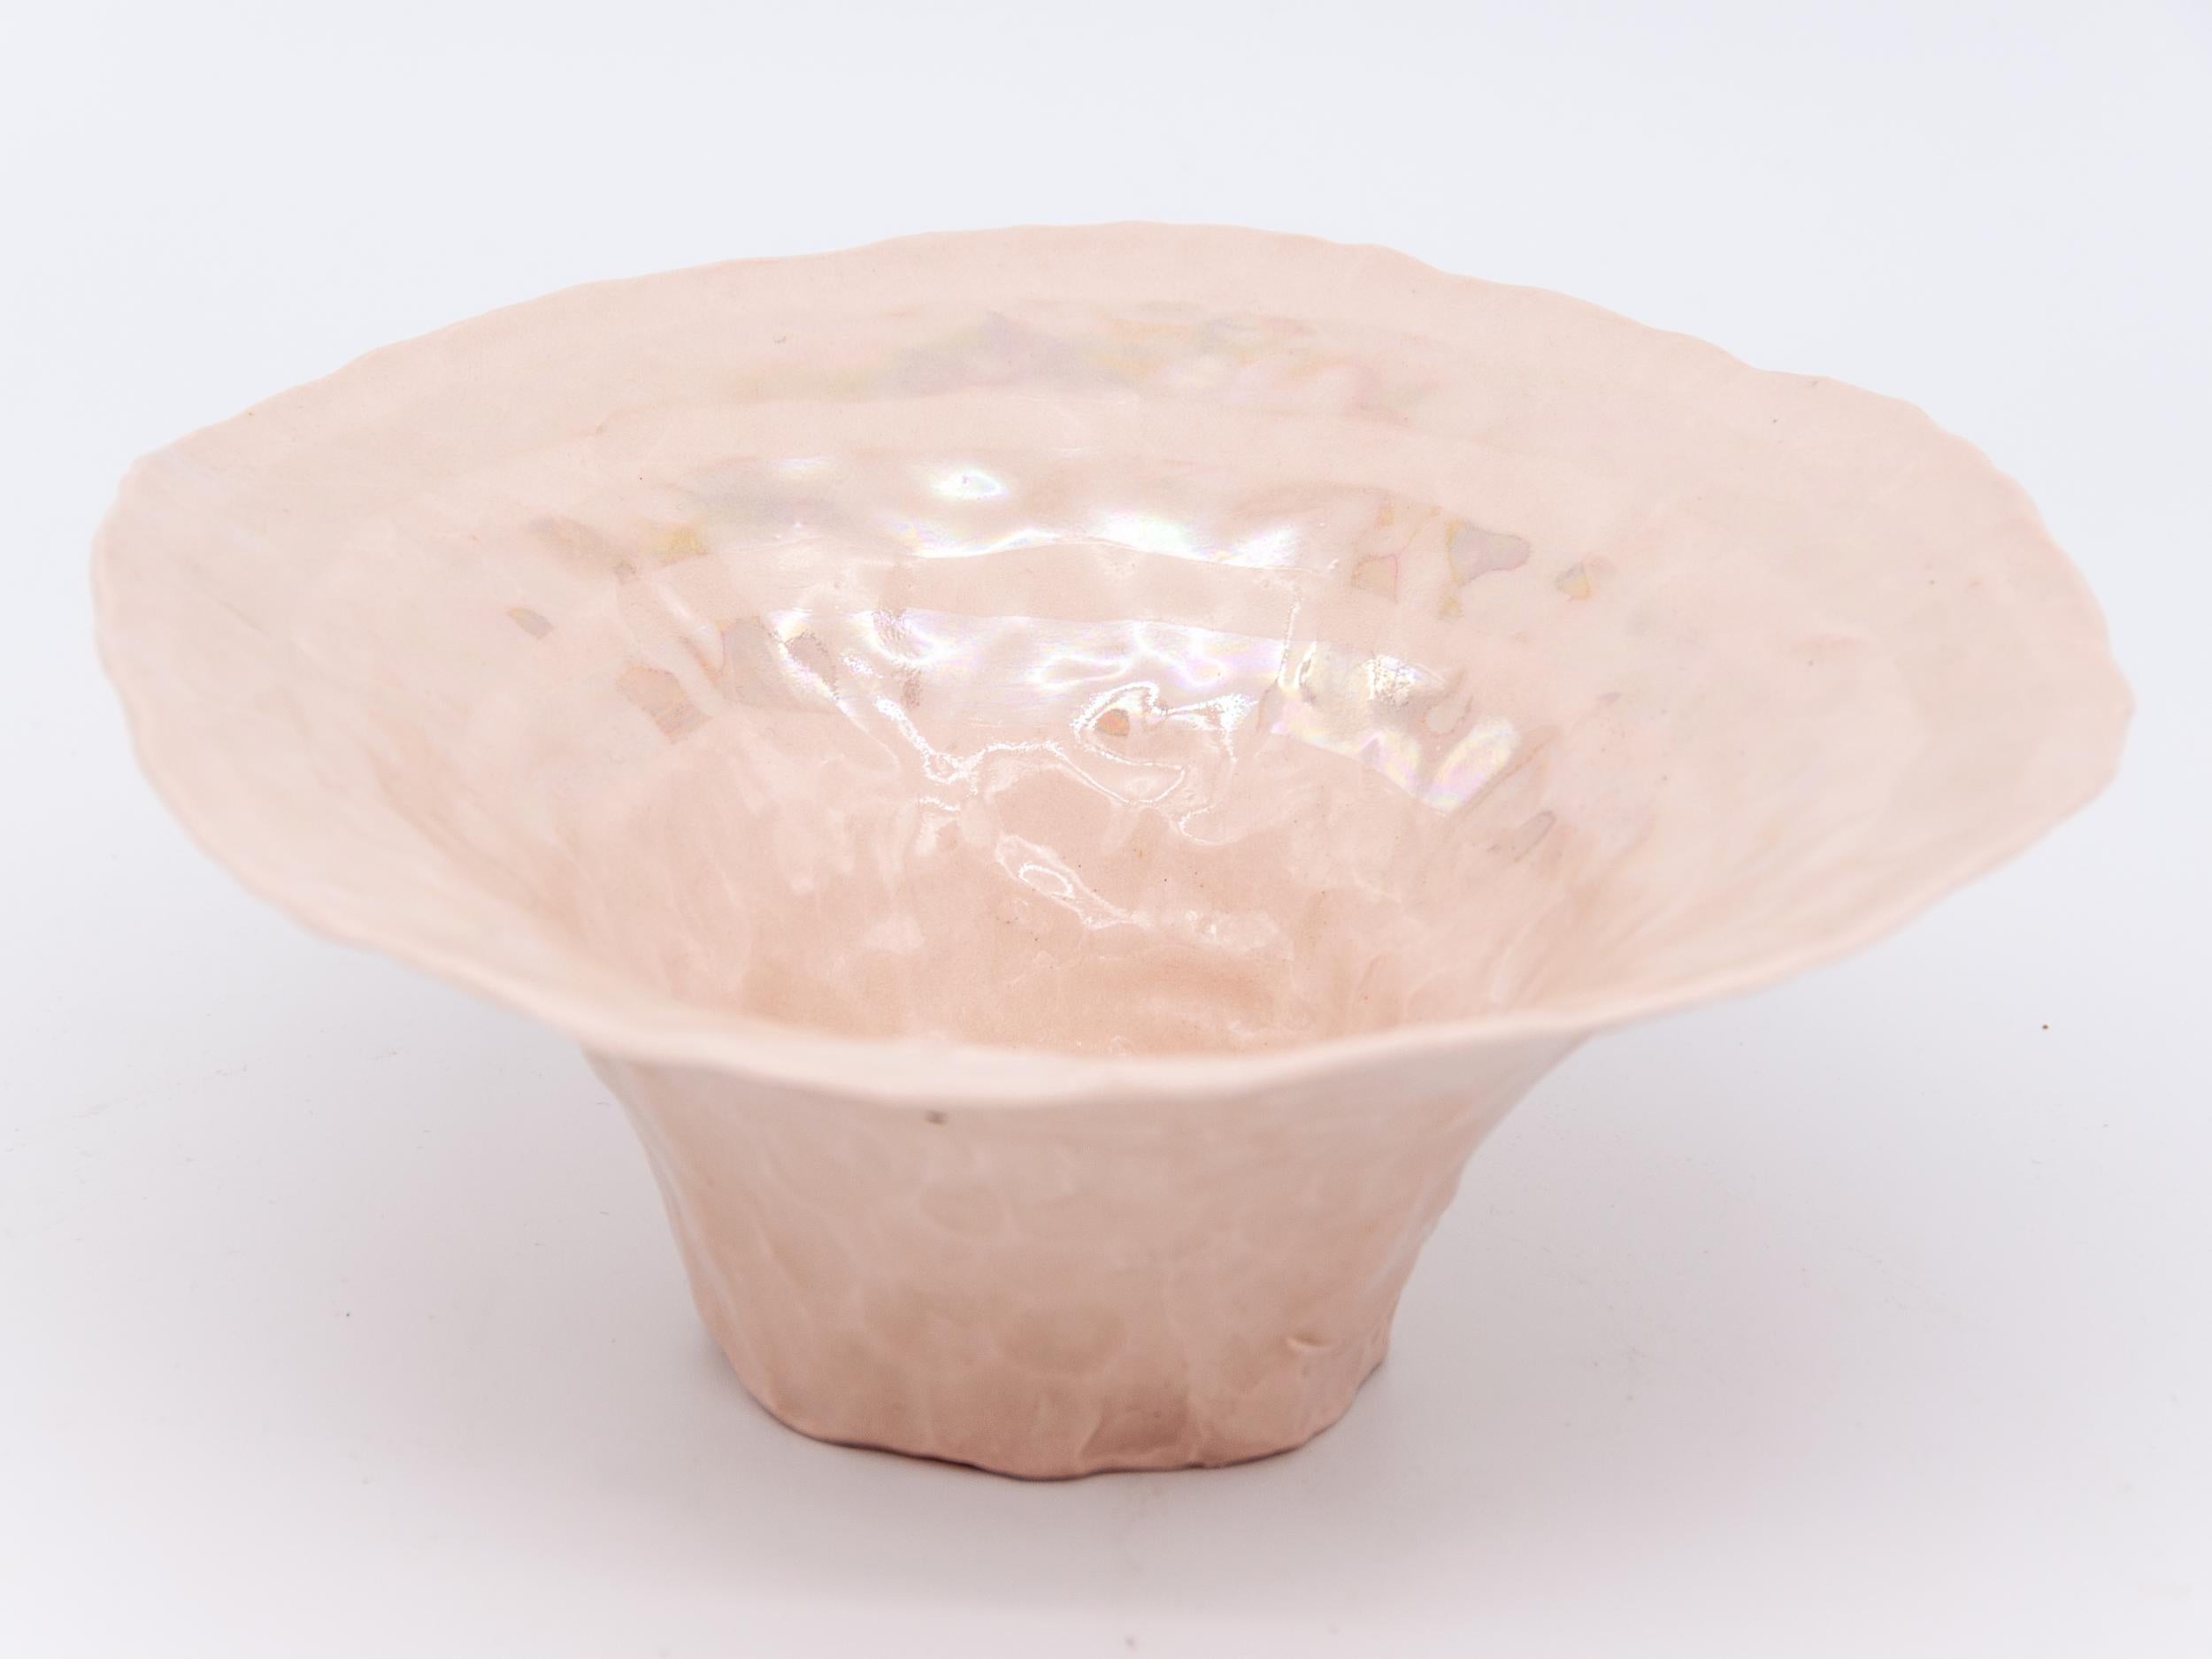 Isabel Halley is a 21st-century ceramic artist based in Brooklyn, NY. She handcrafts all her designs making this pink pinch bowl with stripes in a pearl luster.